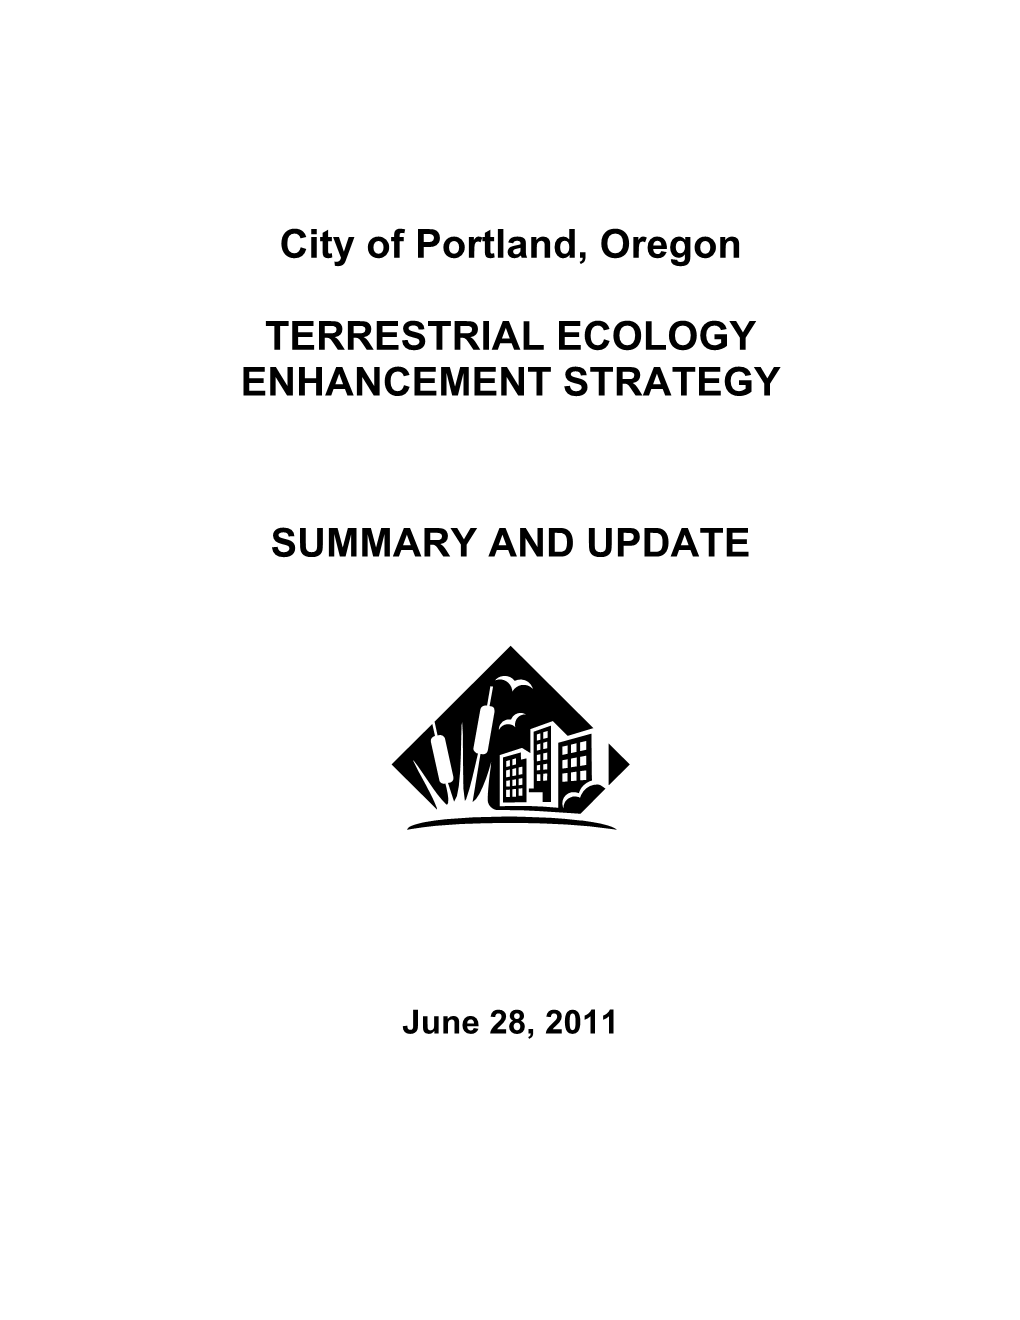 TEES Summary and Update June 28, 2011 I